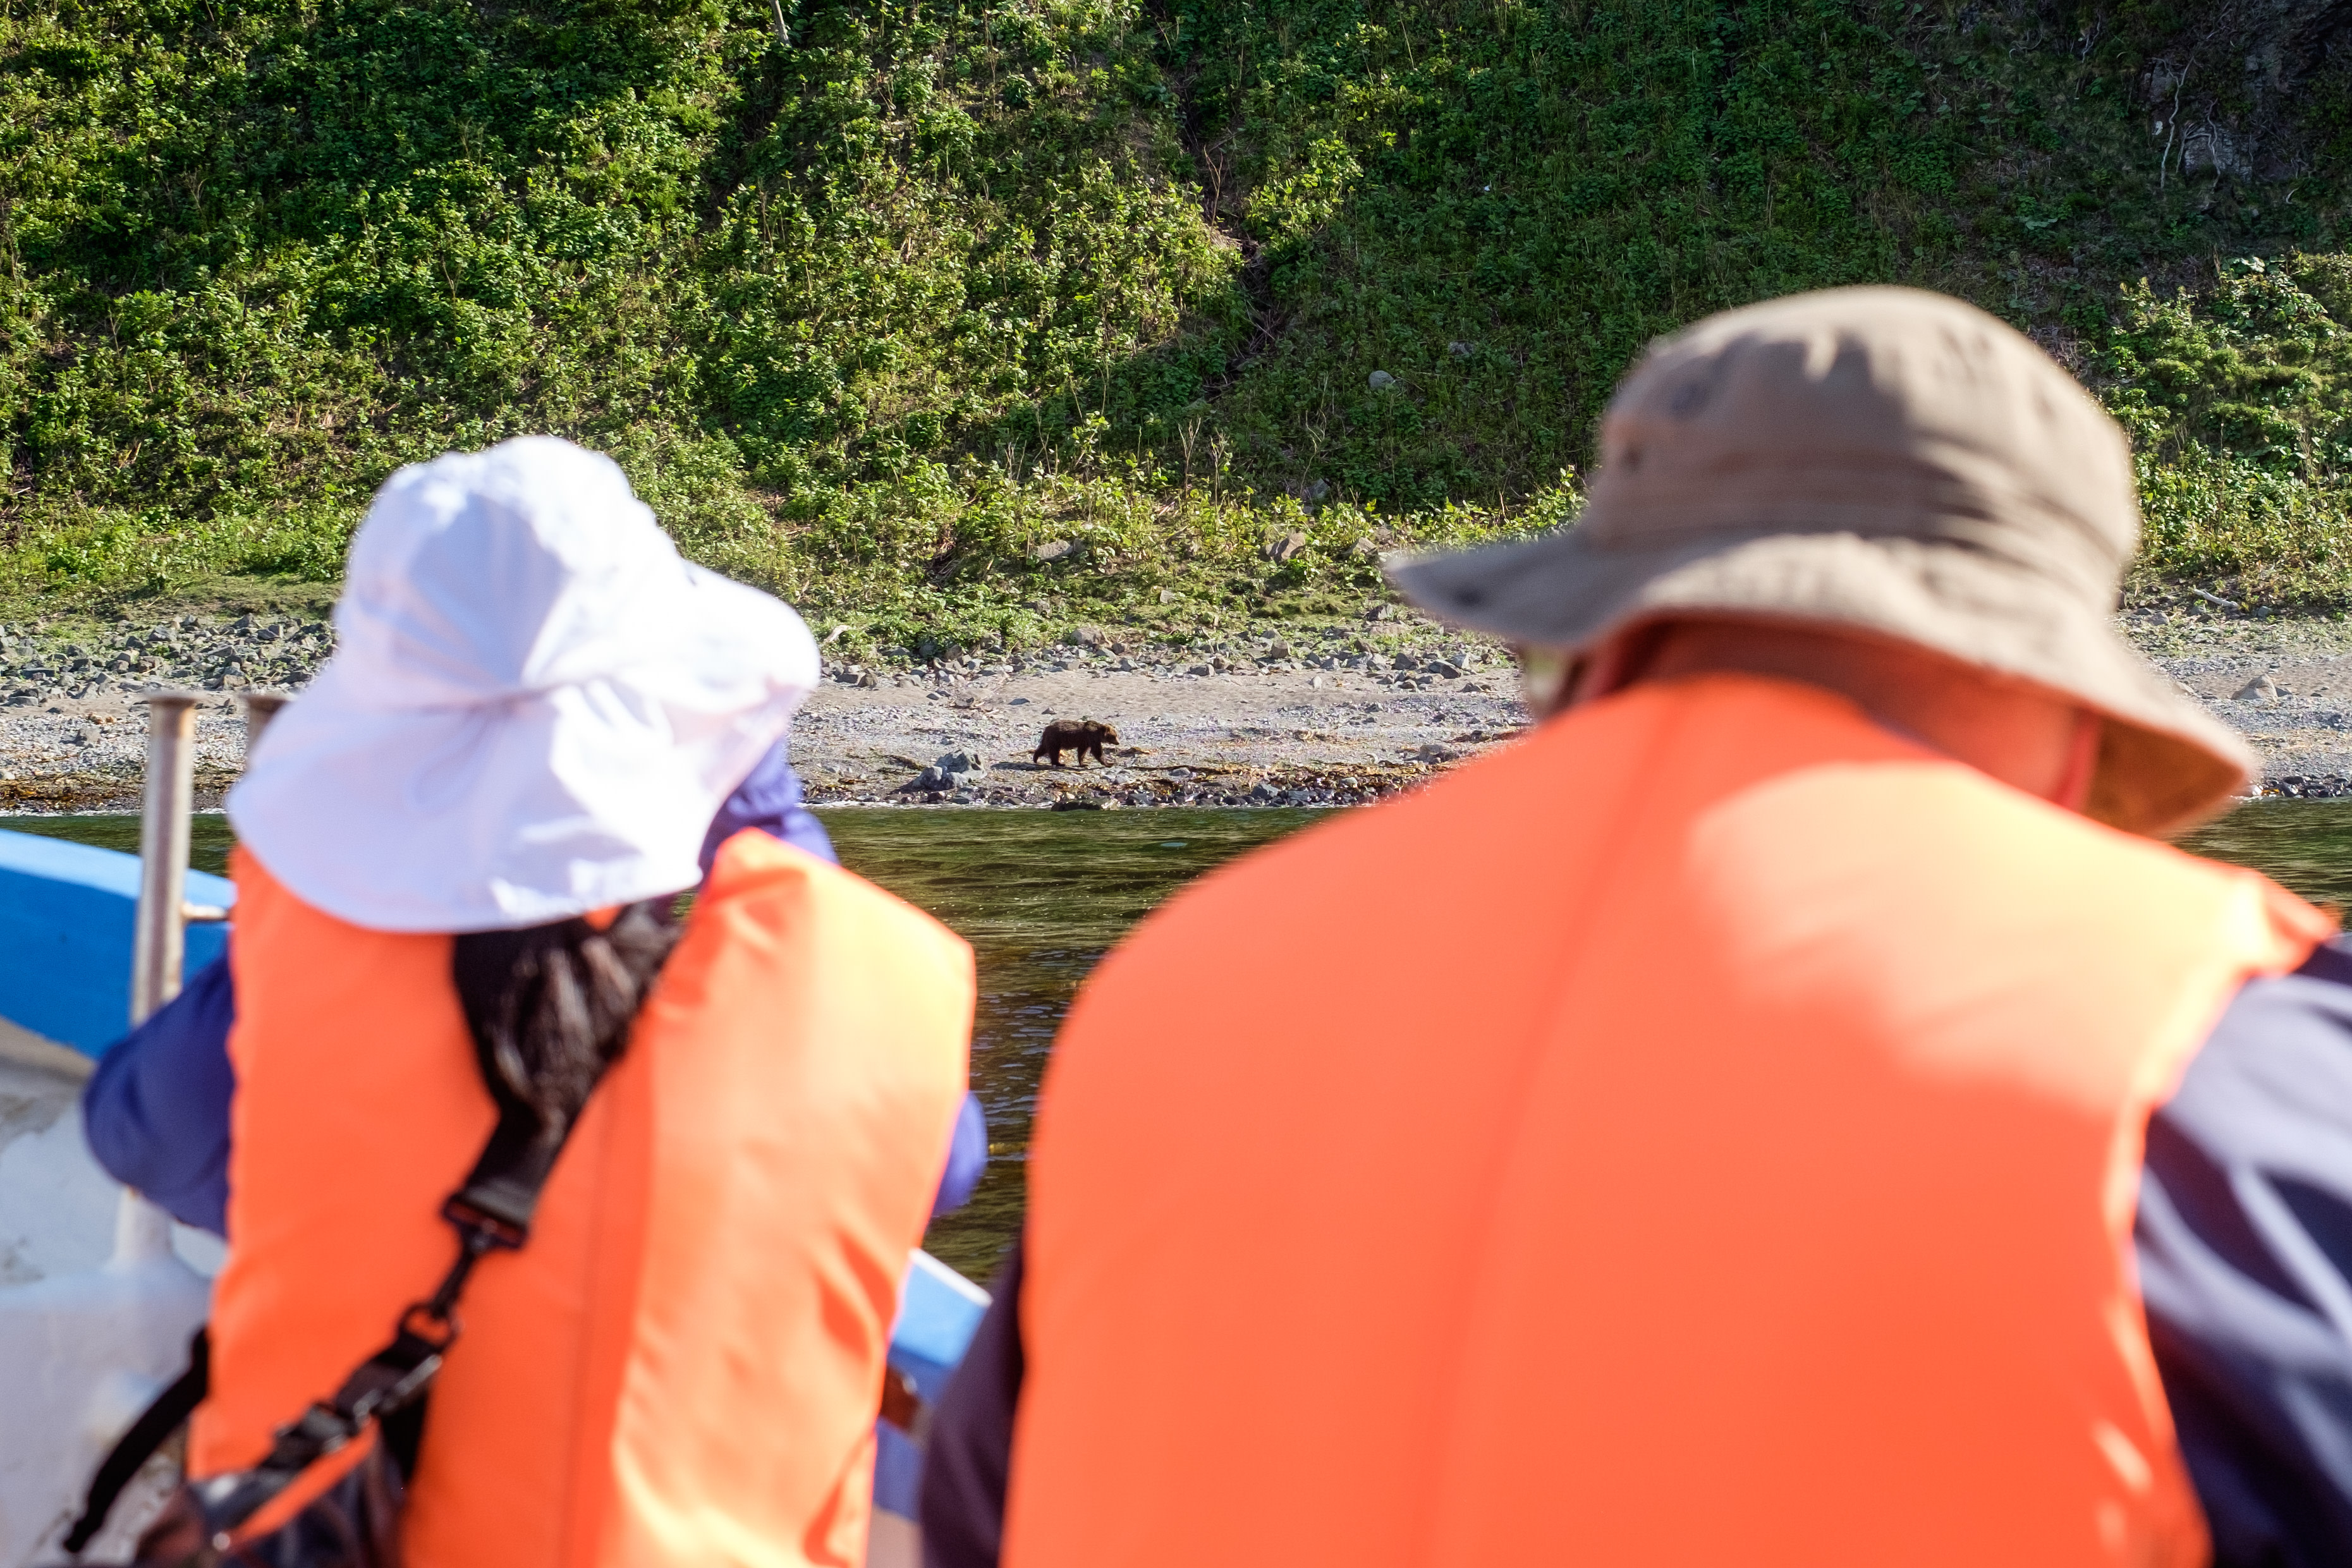 Two wildlife watchers wearing orange life jackets and riding a small boat look at a Brown Bear walking along the shore